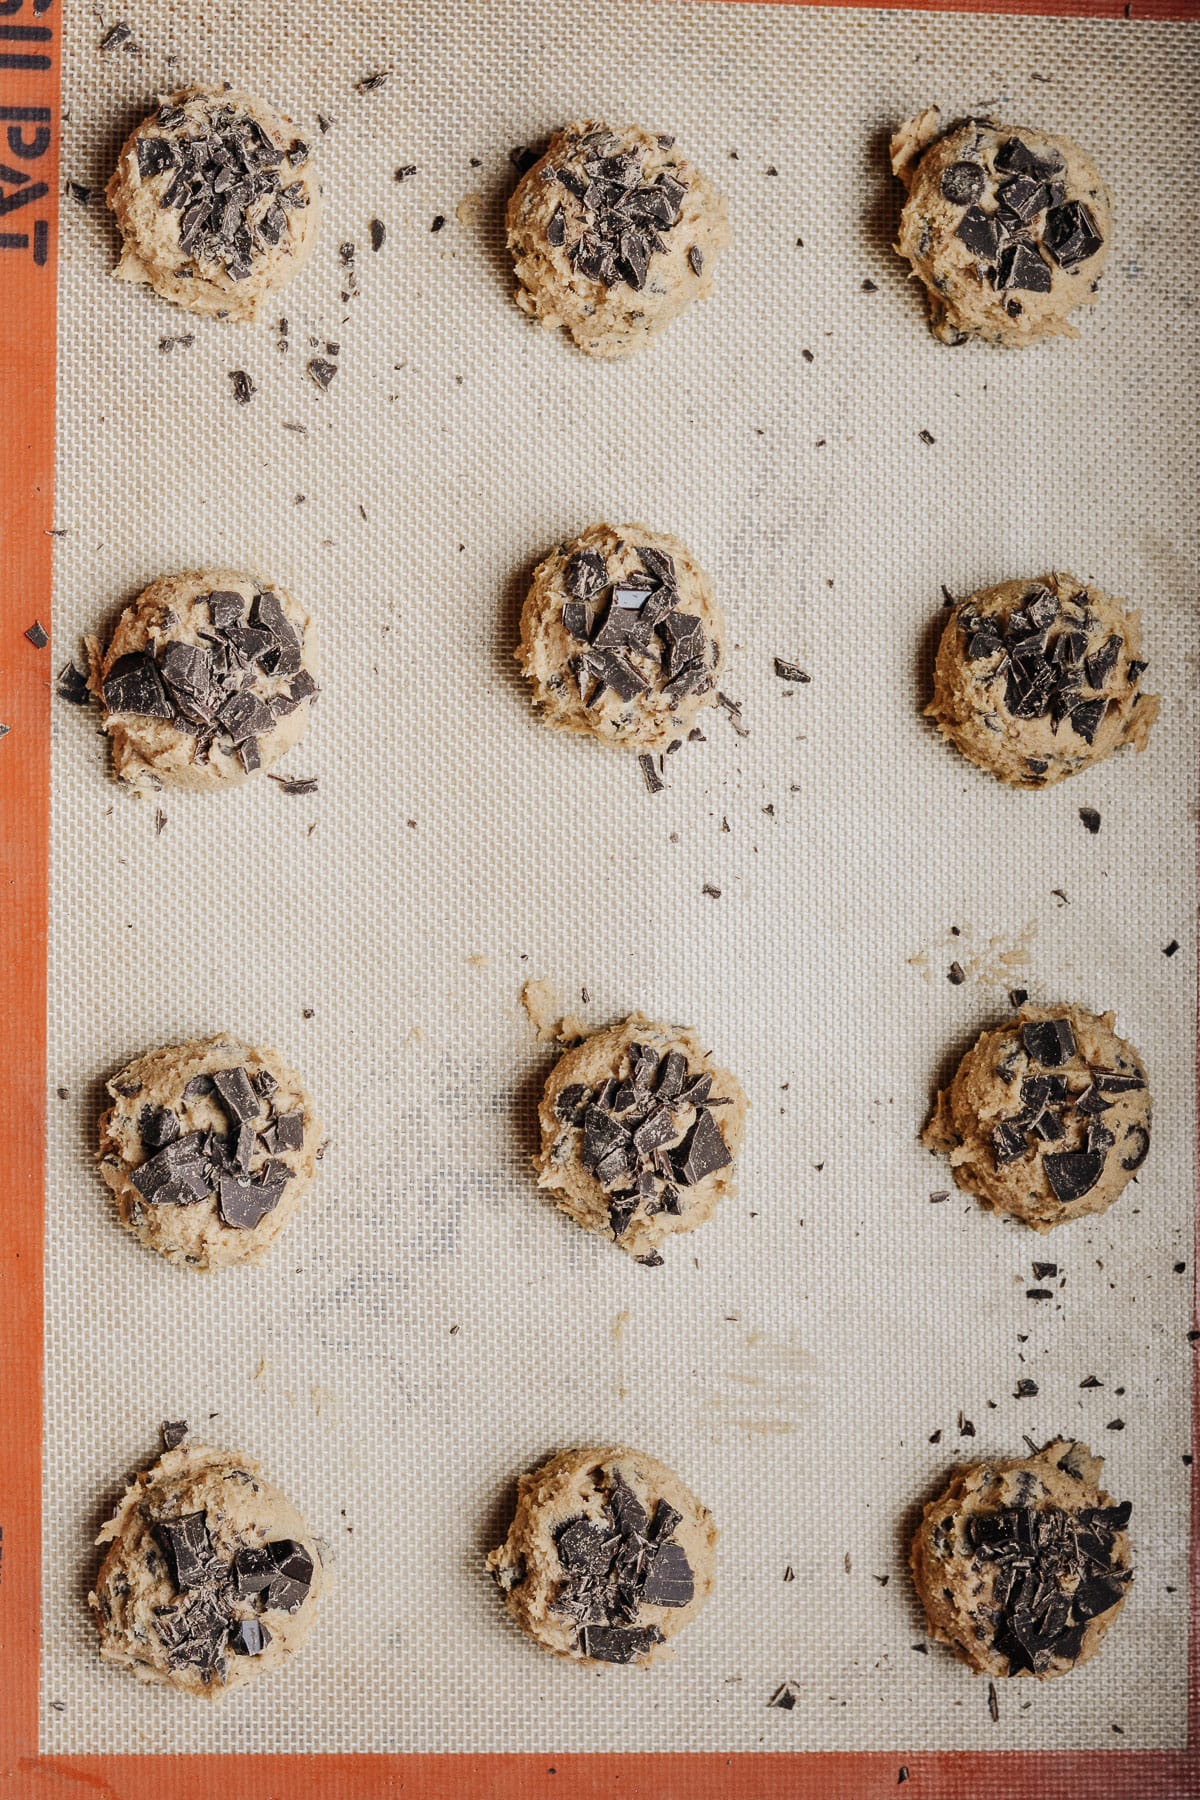 Top down view of cookie dough balls on a baking sheet lined with a silpat mat.